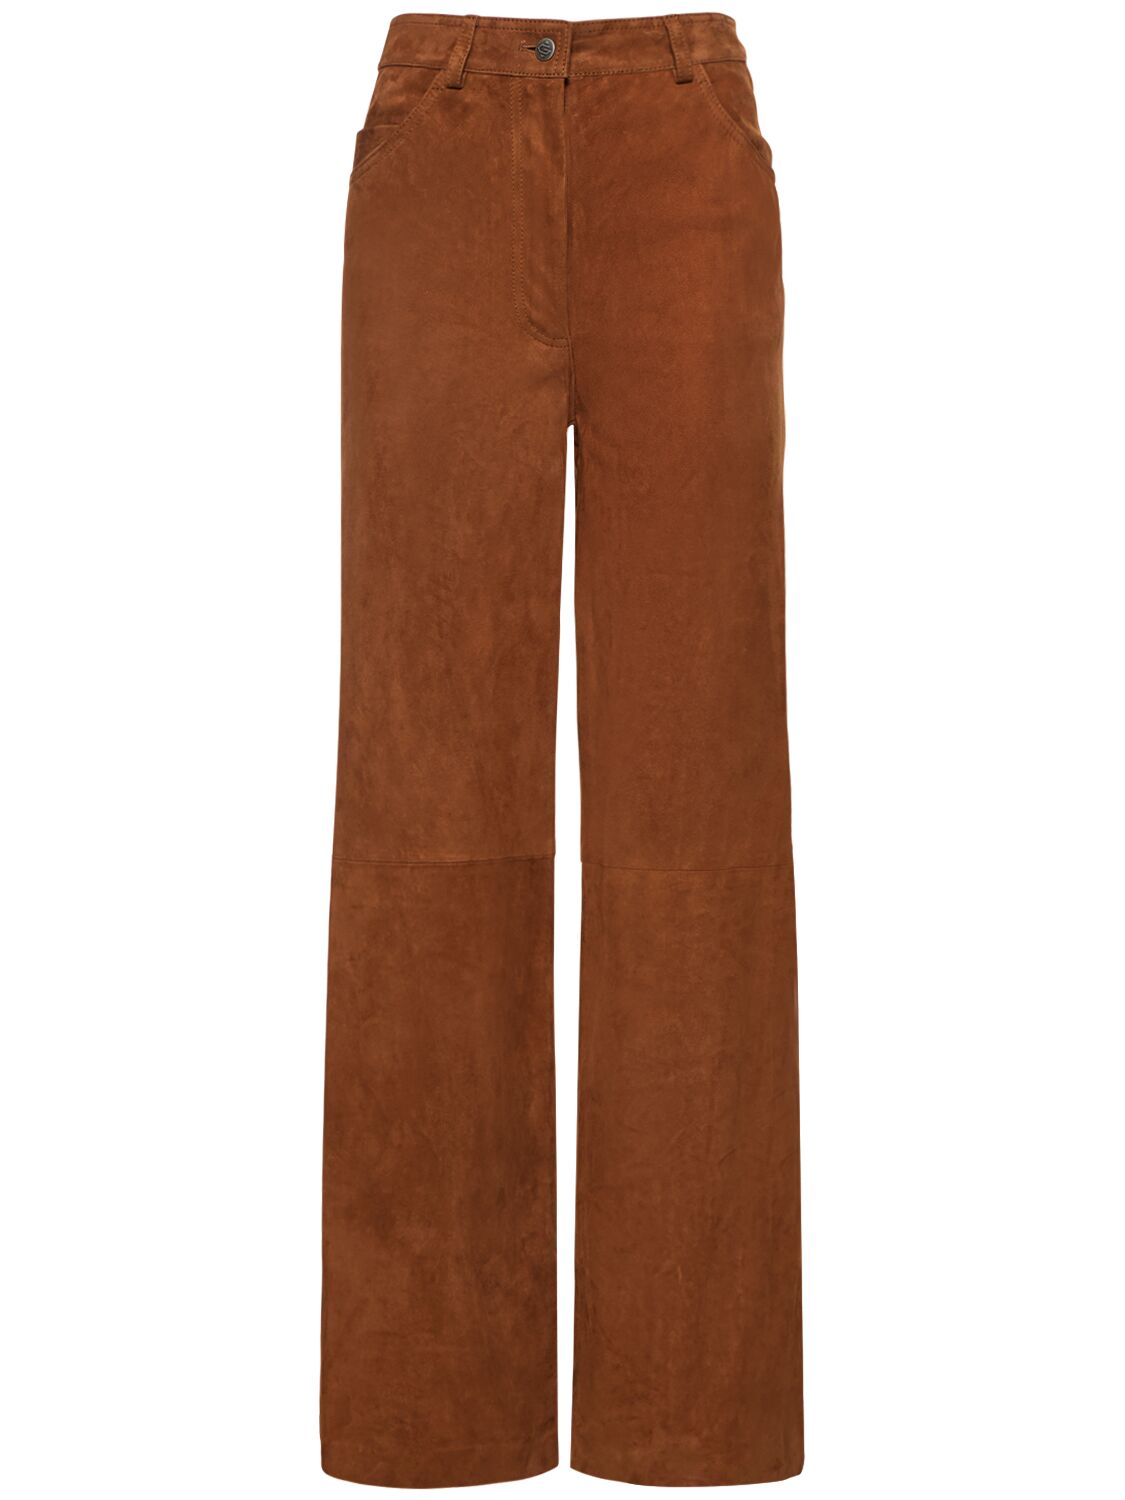 Suede Leather Pants